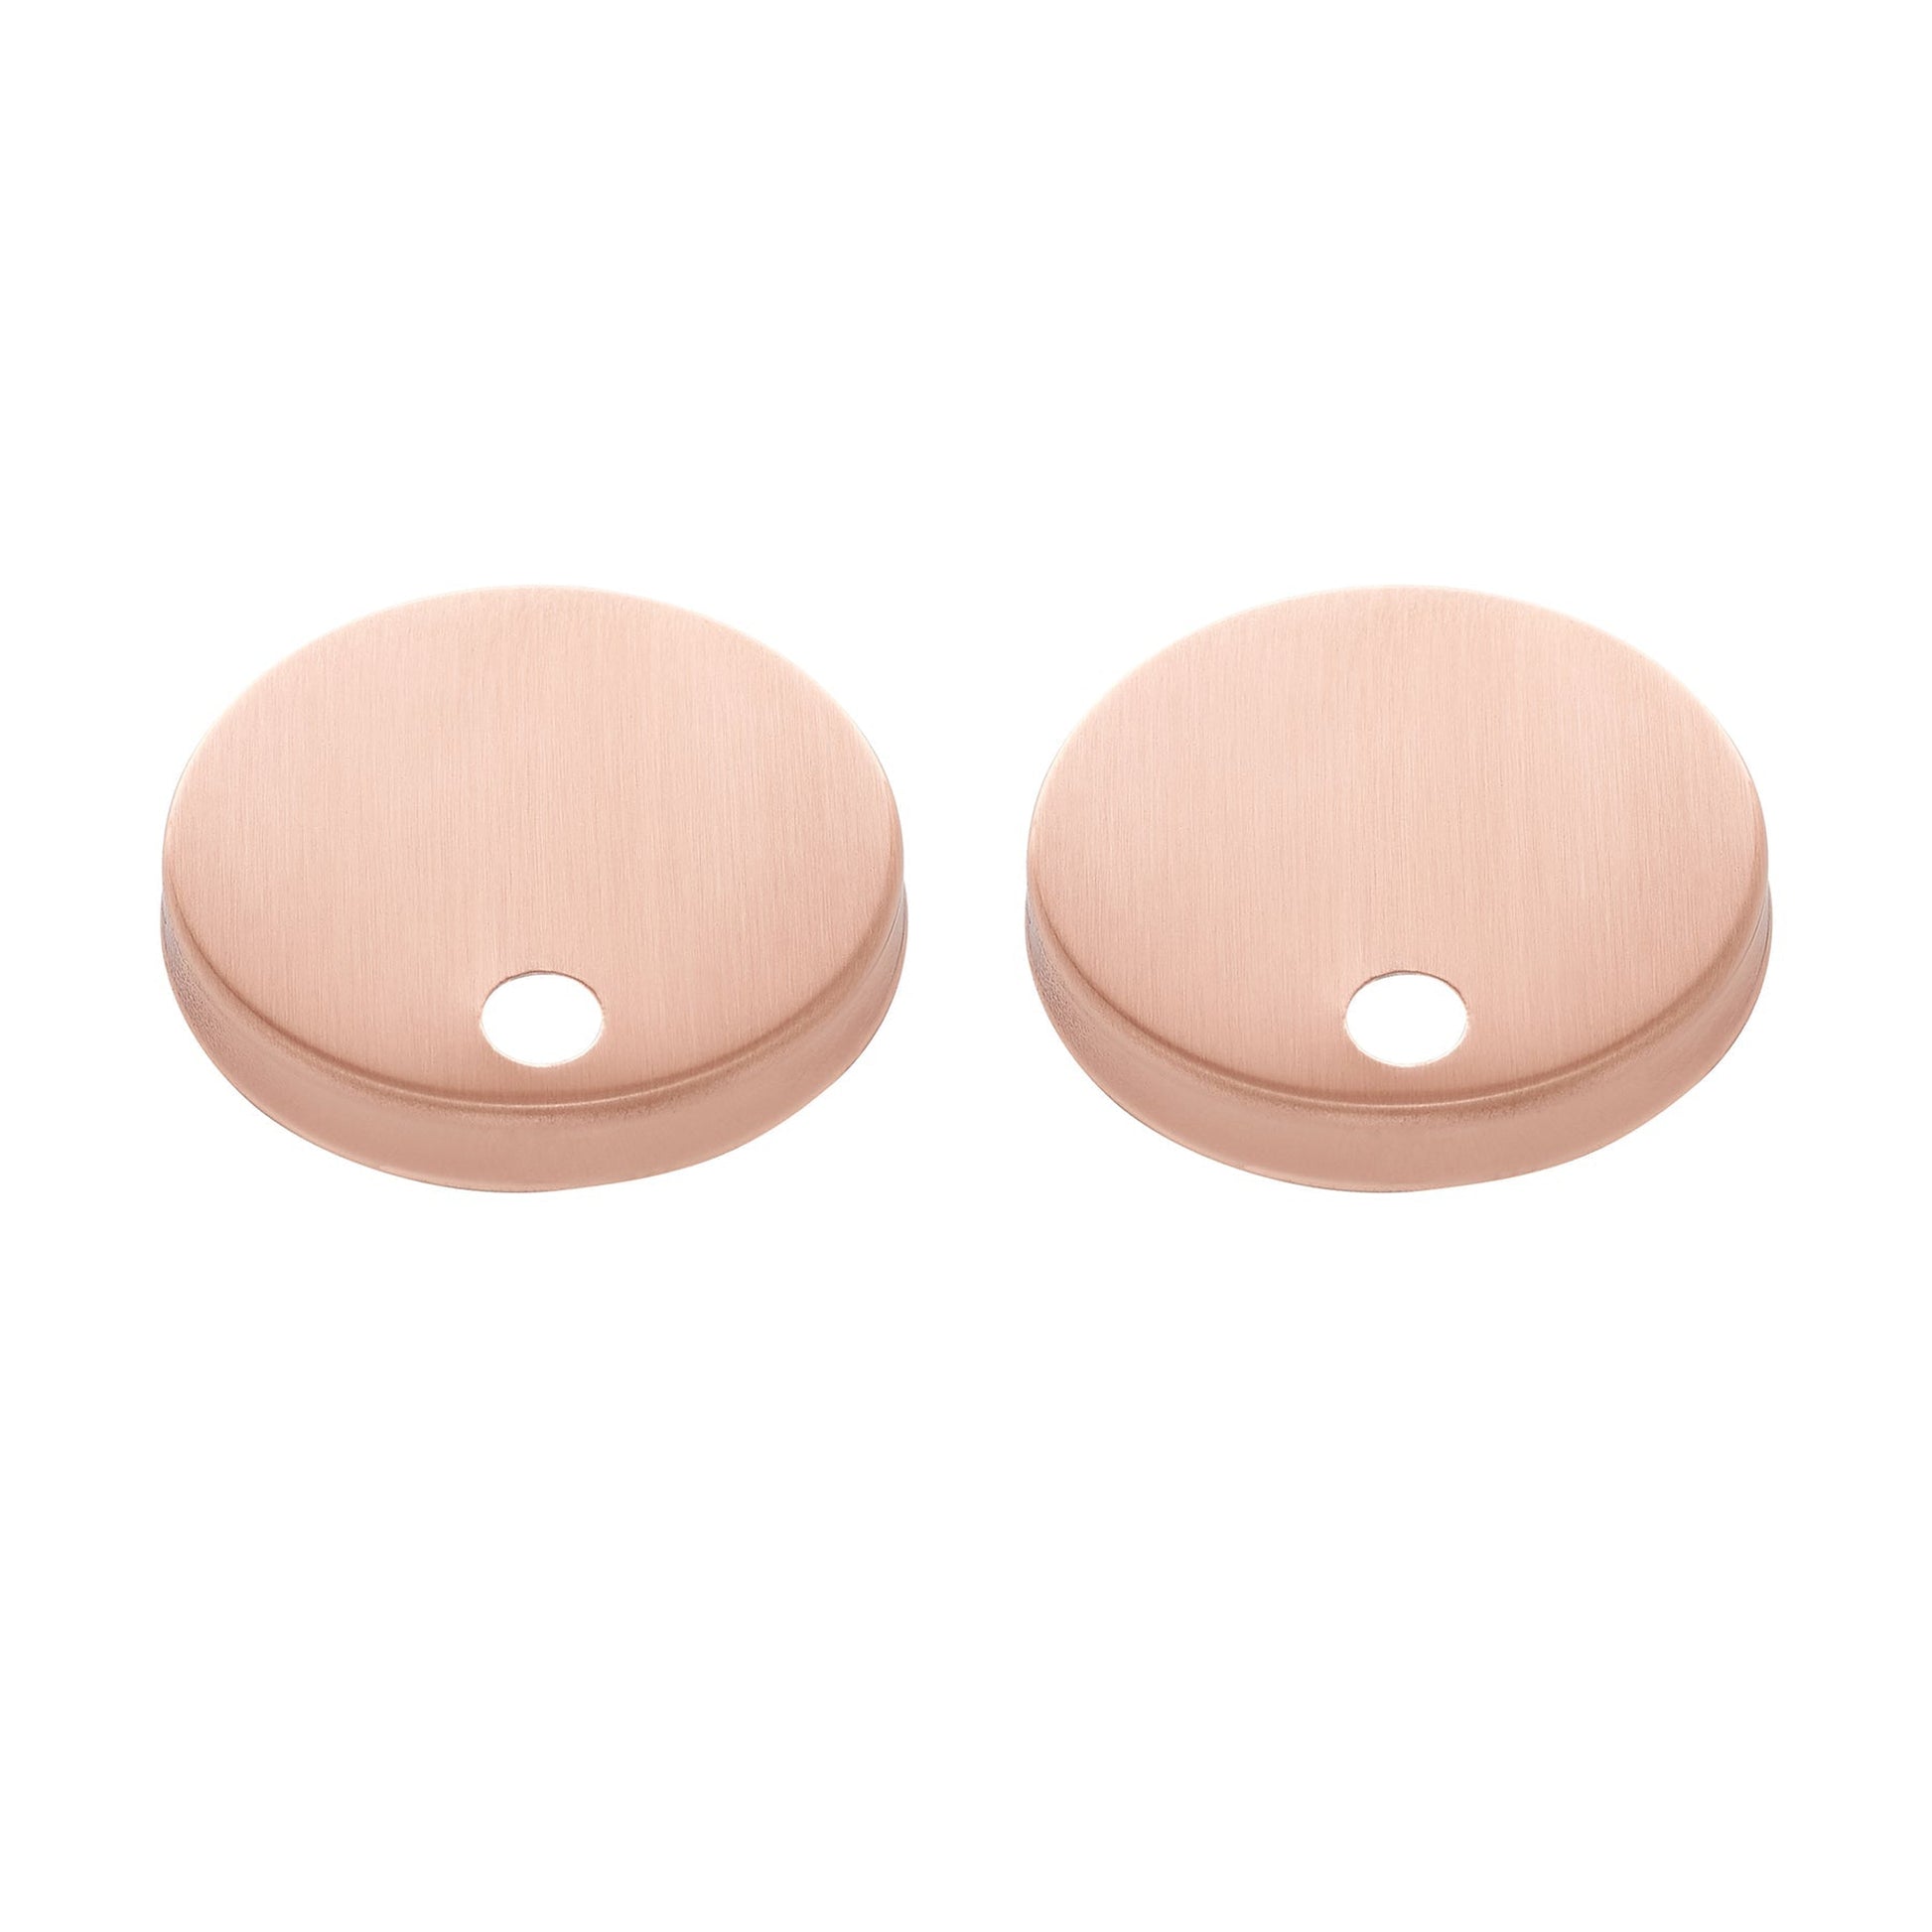 Swiss Madison Rose Gold Toilet Hardware For SM-2T120